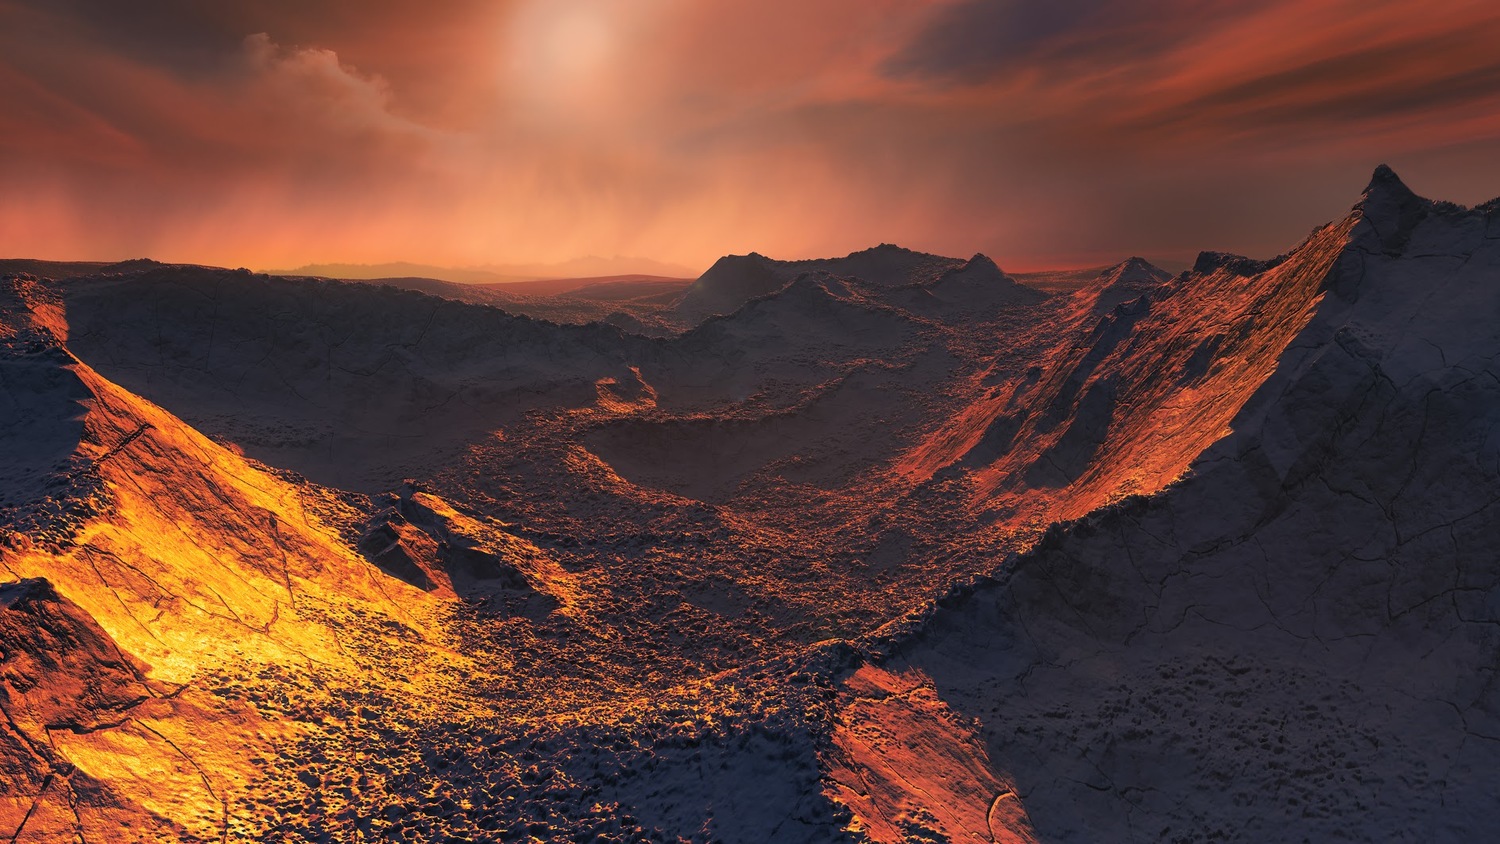 Artistic impression of a Sunset from Barnard's star.